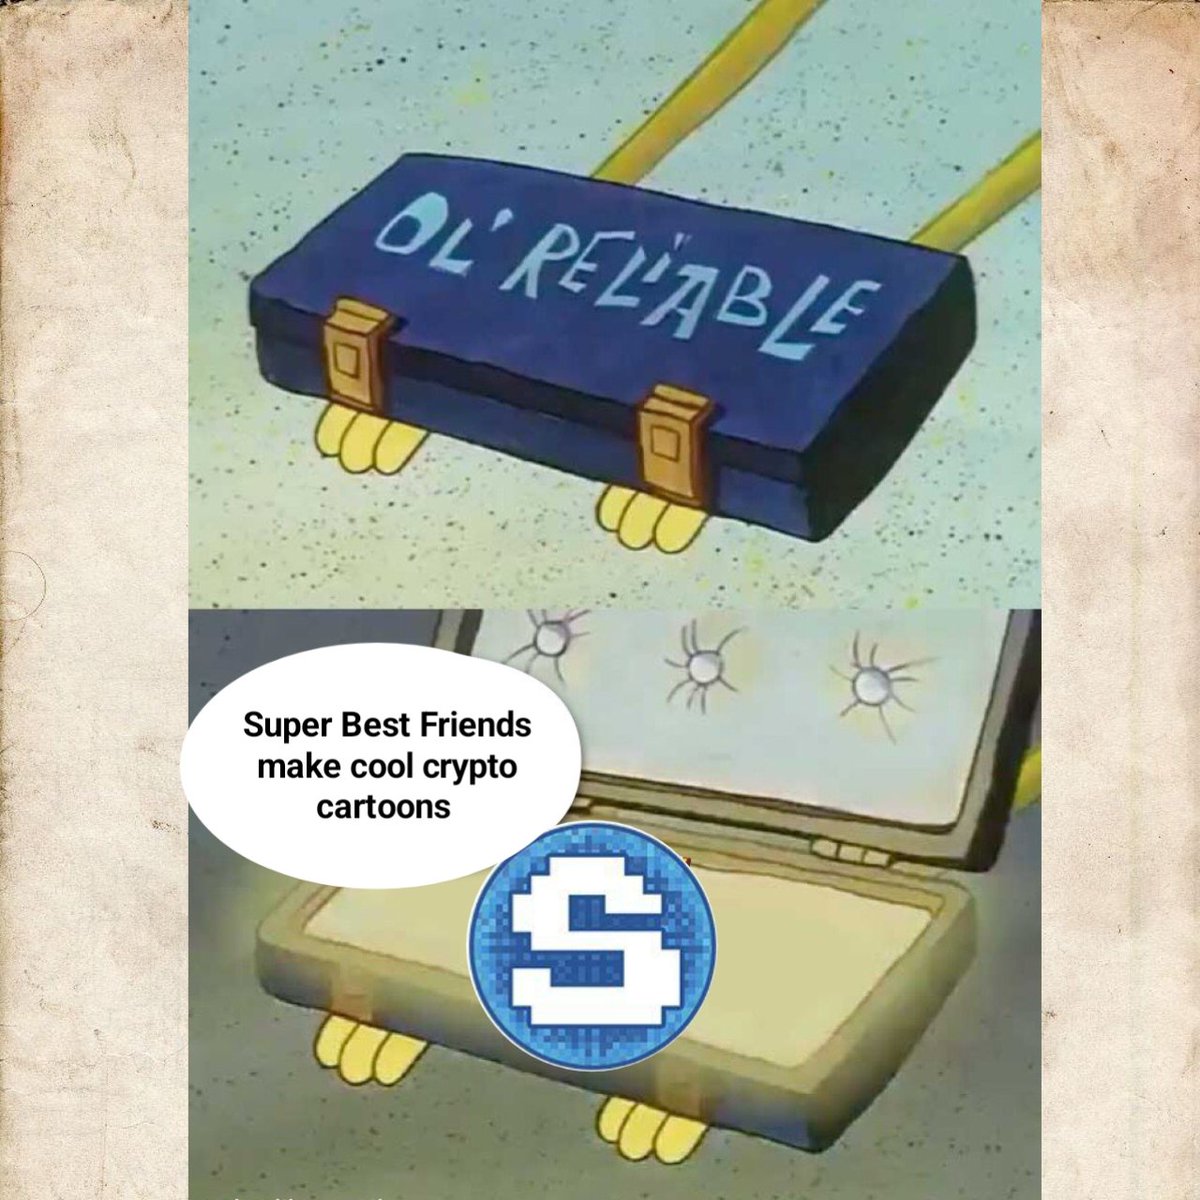 SuperBestFriends stands out as an exceptional project, blending the excitement of meme coins with charming crypto cartoons. Its creative approach and engaging content make it a must-follow in the crypto space. #SuperBestFriends $SUBF @superbestcoin